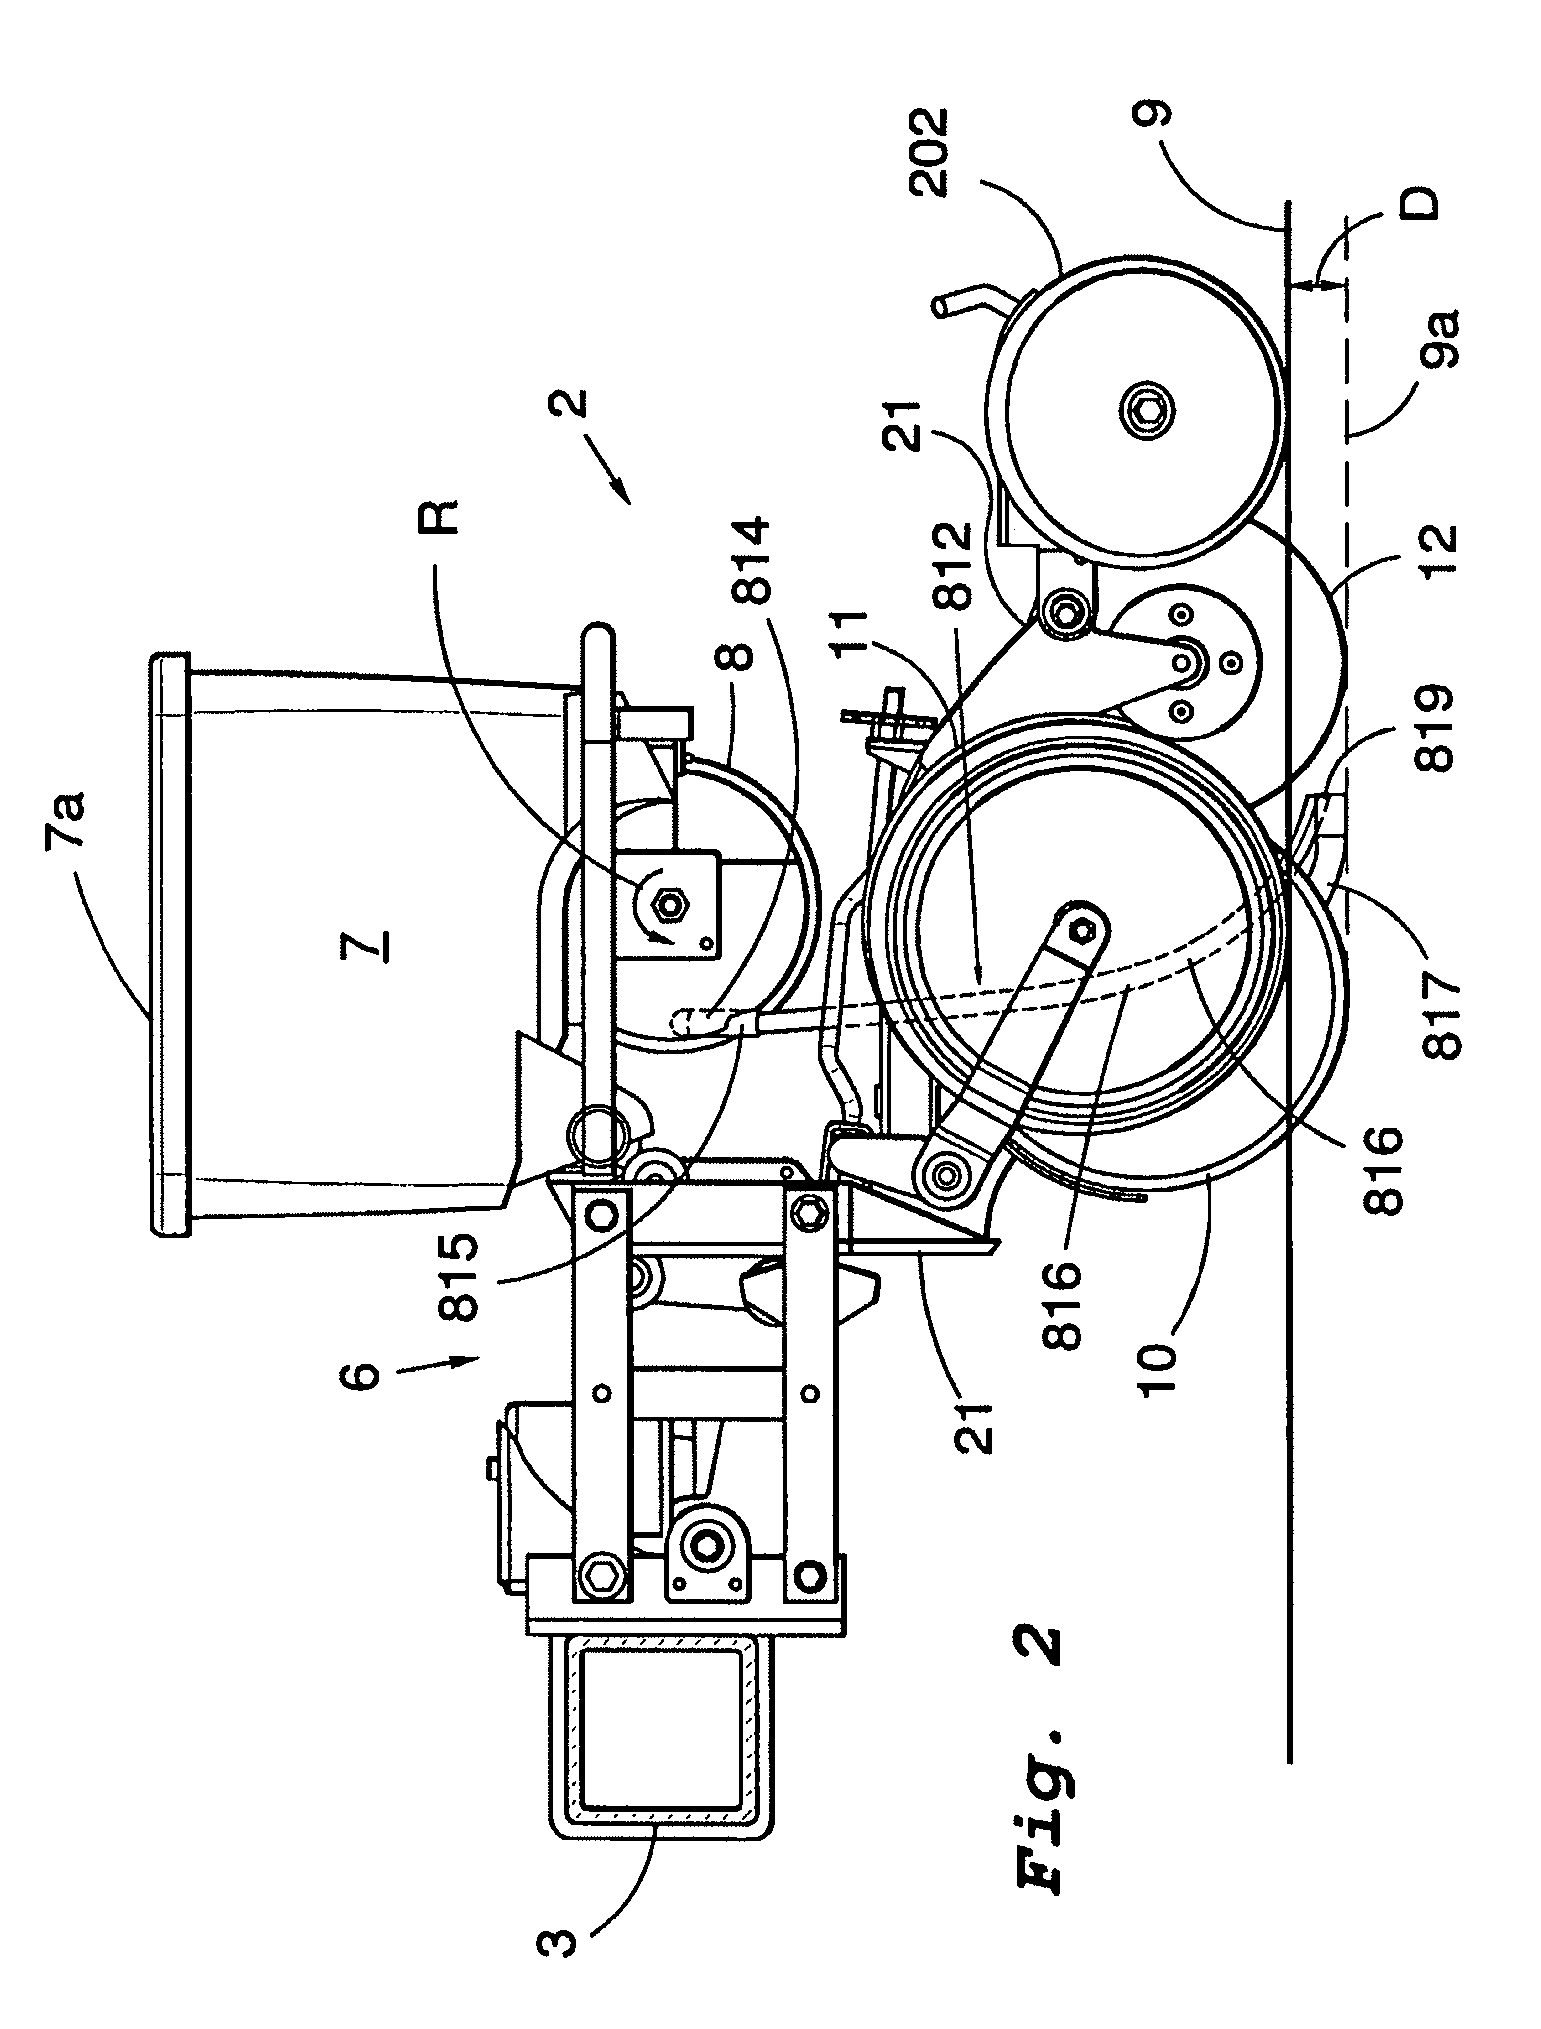 Arrangement of a seed metering device on an agricultural machine